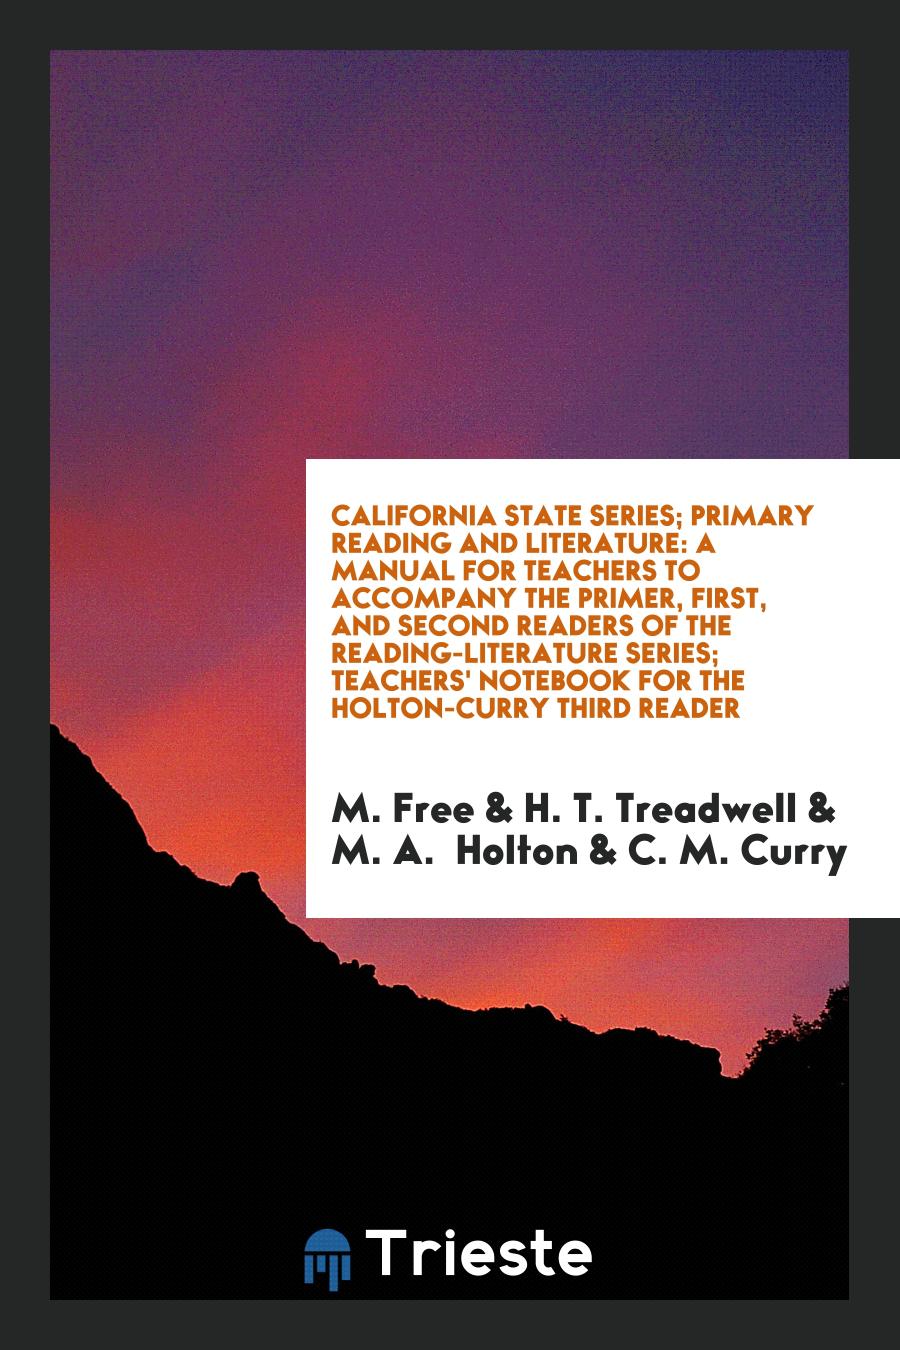 California State Series; Primary Reading and Literature: A Manual for Teachers to Accompany the Primer, First, and Second Readers of the Reading-Literature Series; Teachers' Notebook for the Holton-Curry Third Reader